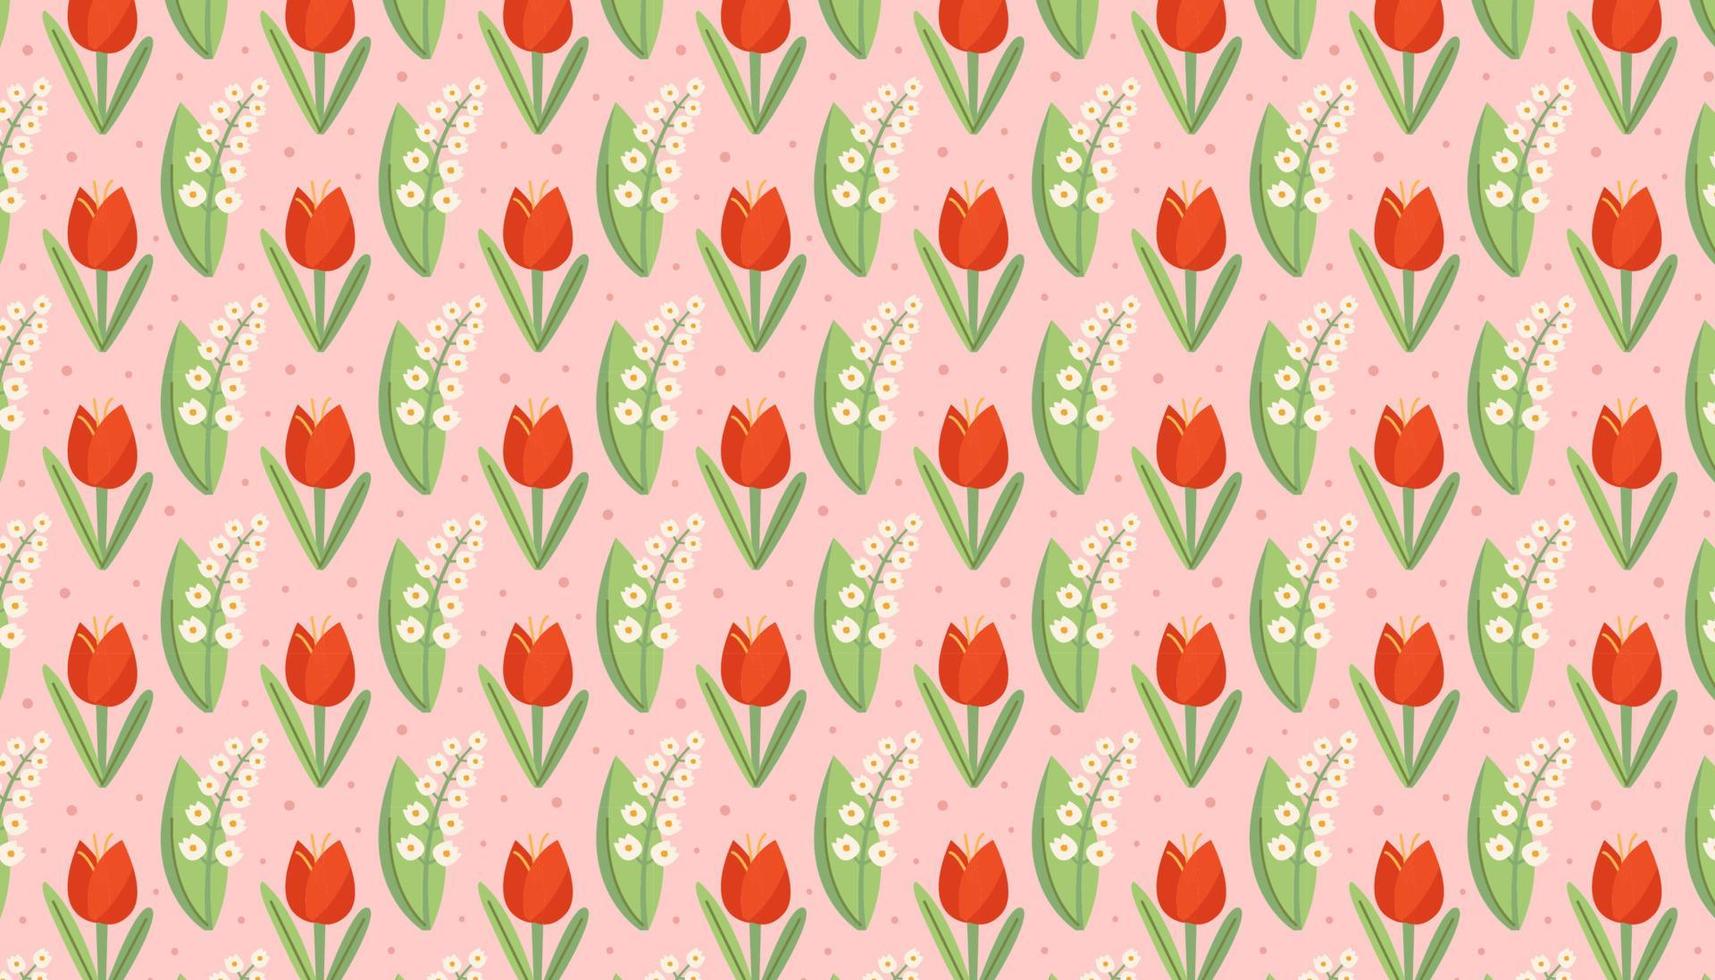 Snowdrop tulip natural floral pattern texture background banner Packaging design vector